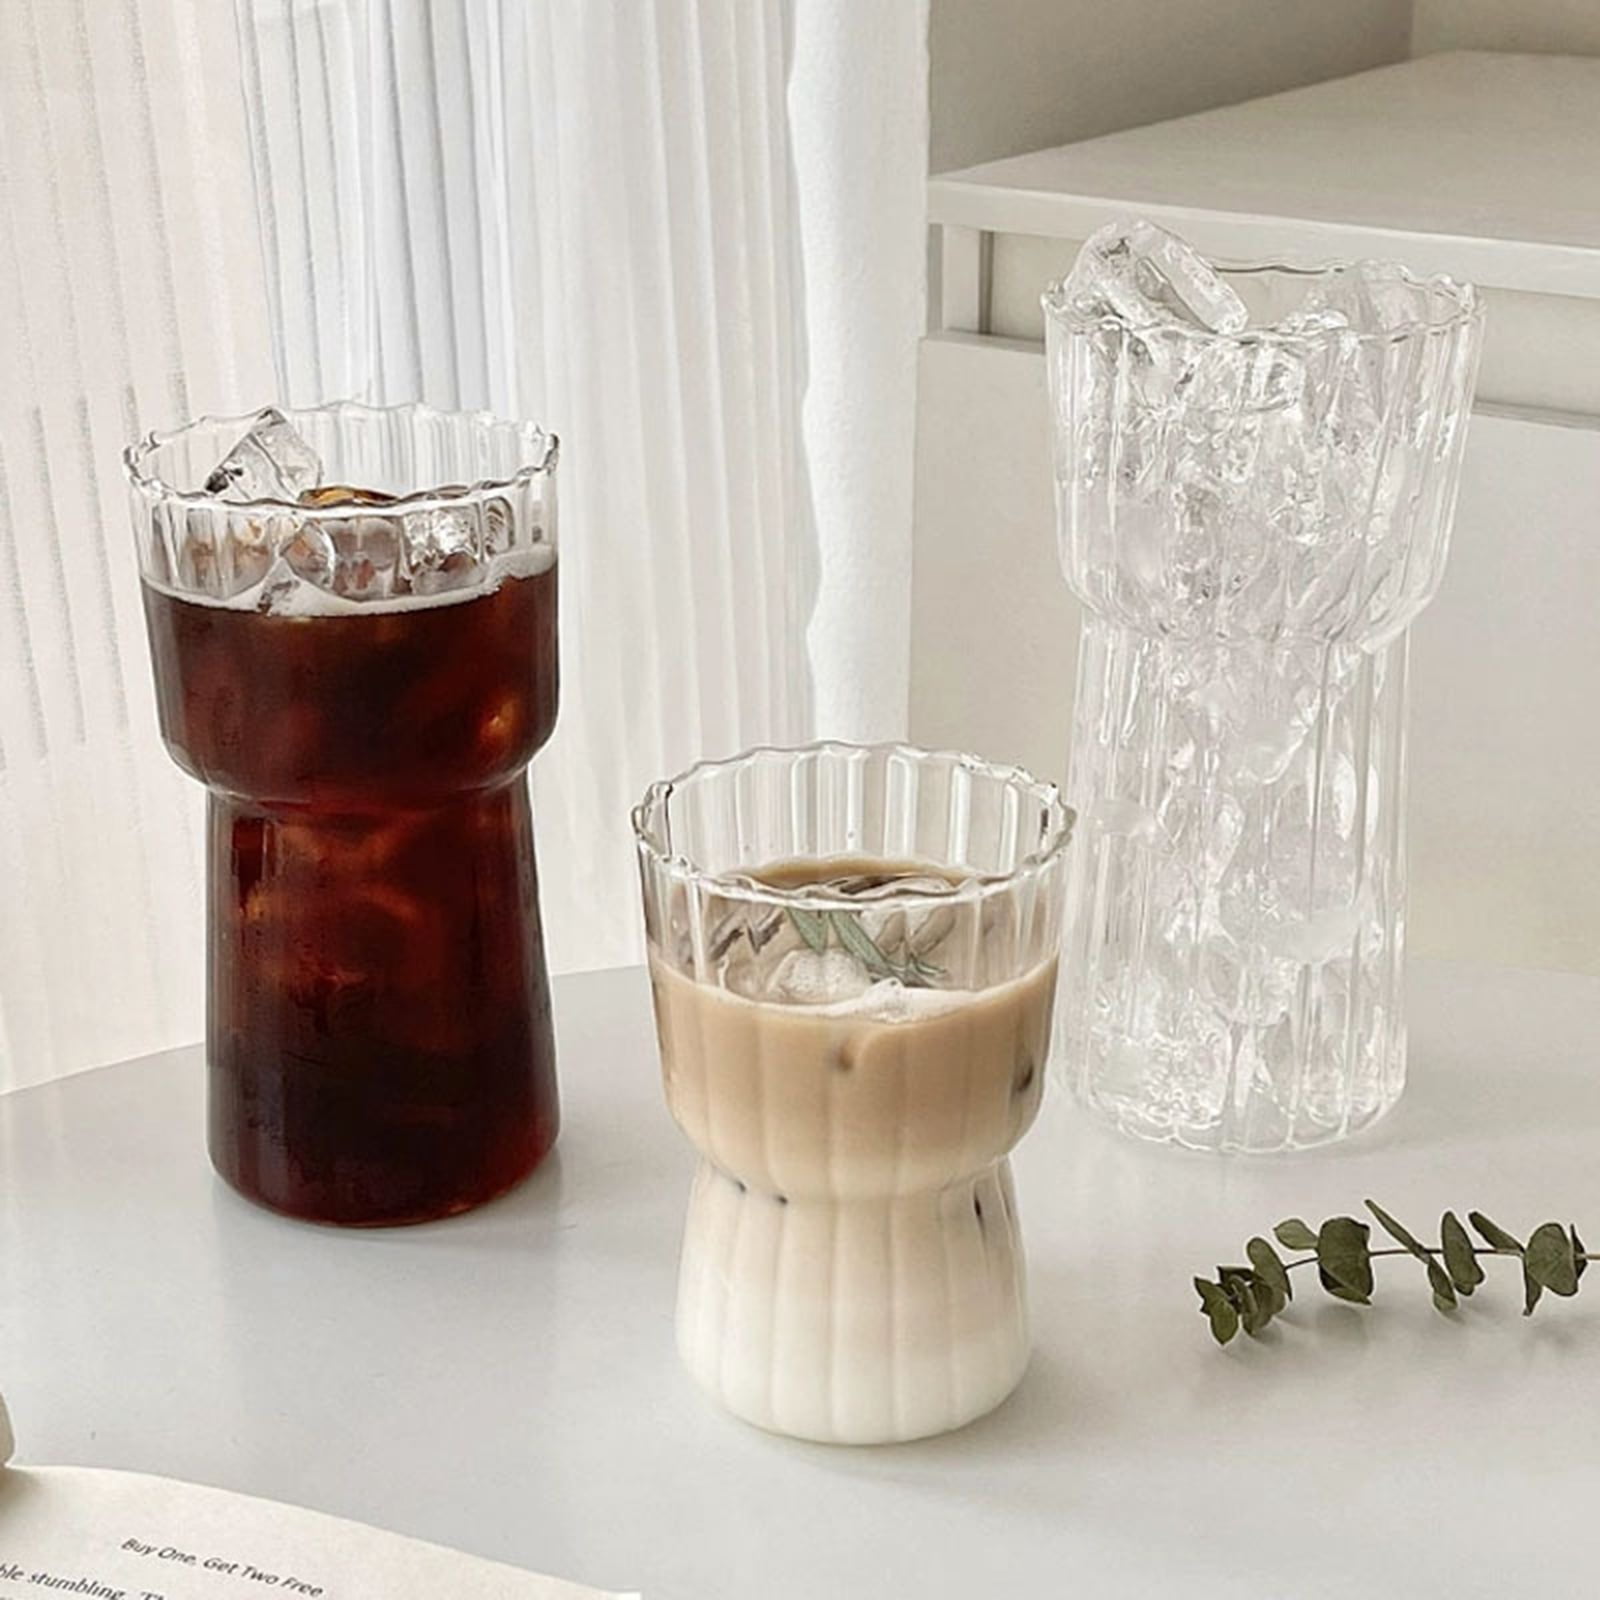 MEFFEE Tumbler Stripe Glass Cup, Vintage Glassware, Elegant Ribbed Glass Tumblers, Ribbed Glass Drinking Jars, Coffee Cup with Lid and Straw